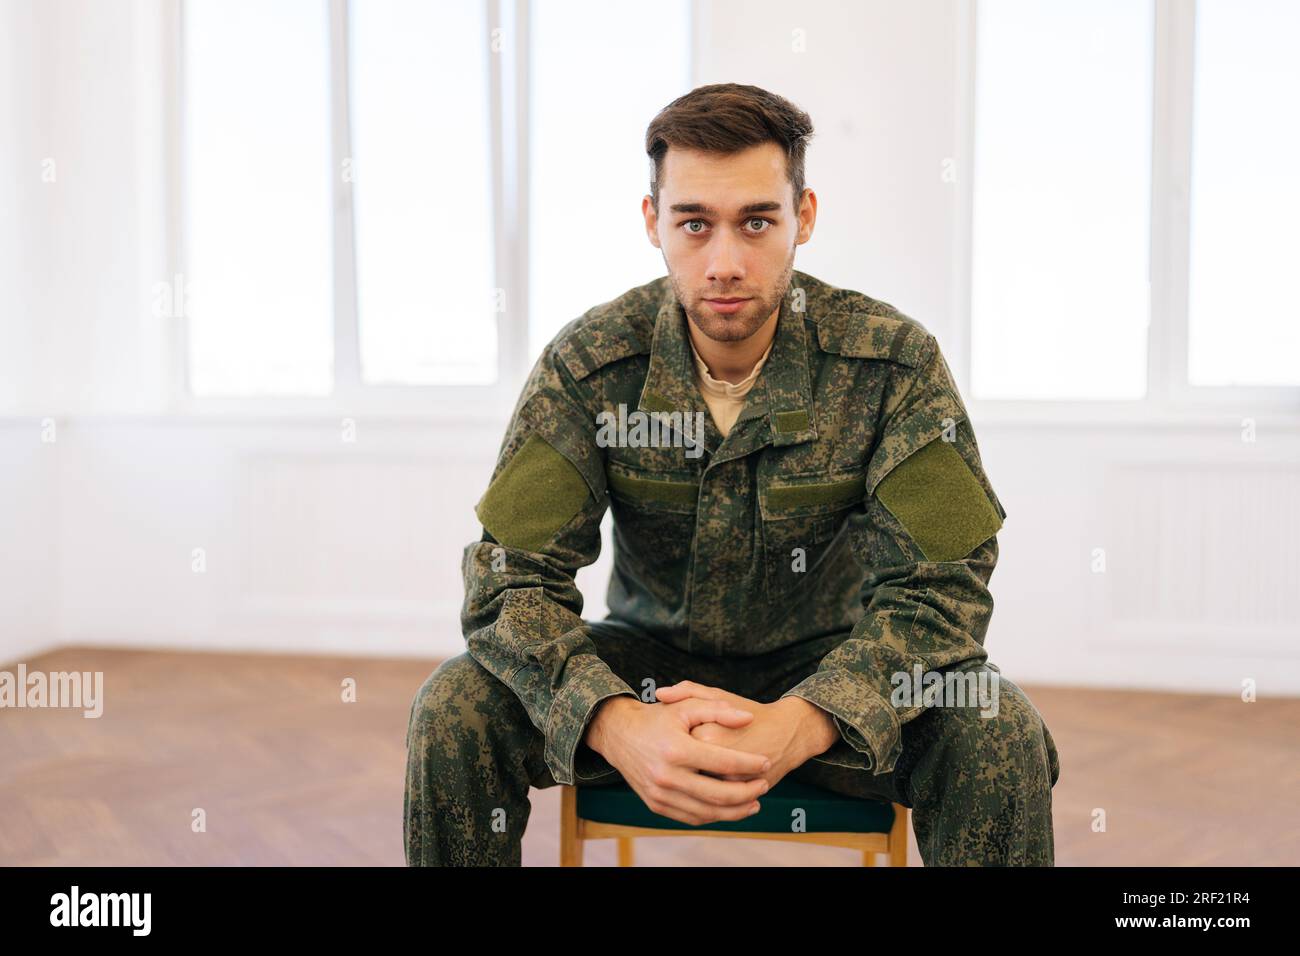 Portrait of stressed soldier male in camouflage uniform sitting in circle during PTSD group therapy session looking at camera with serious expression. Stock Photo